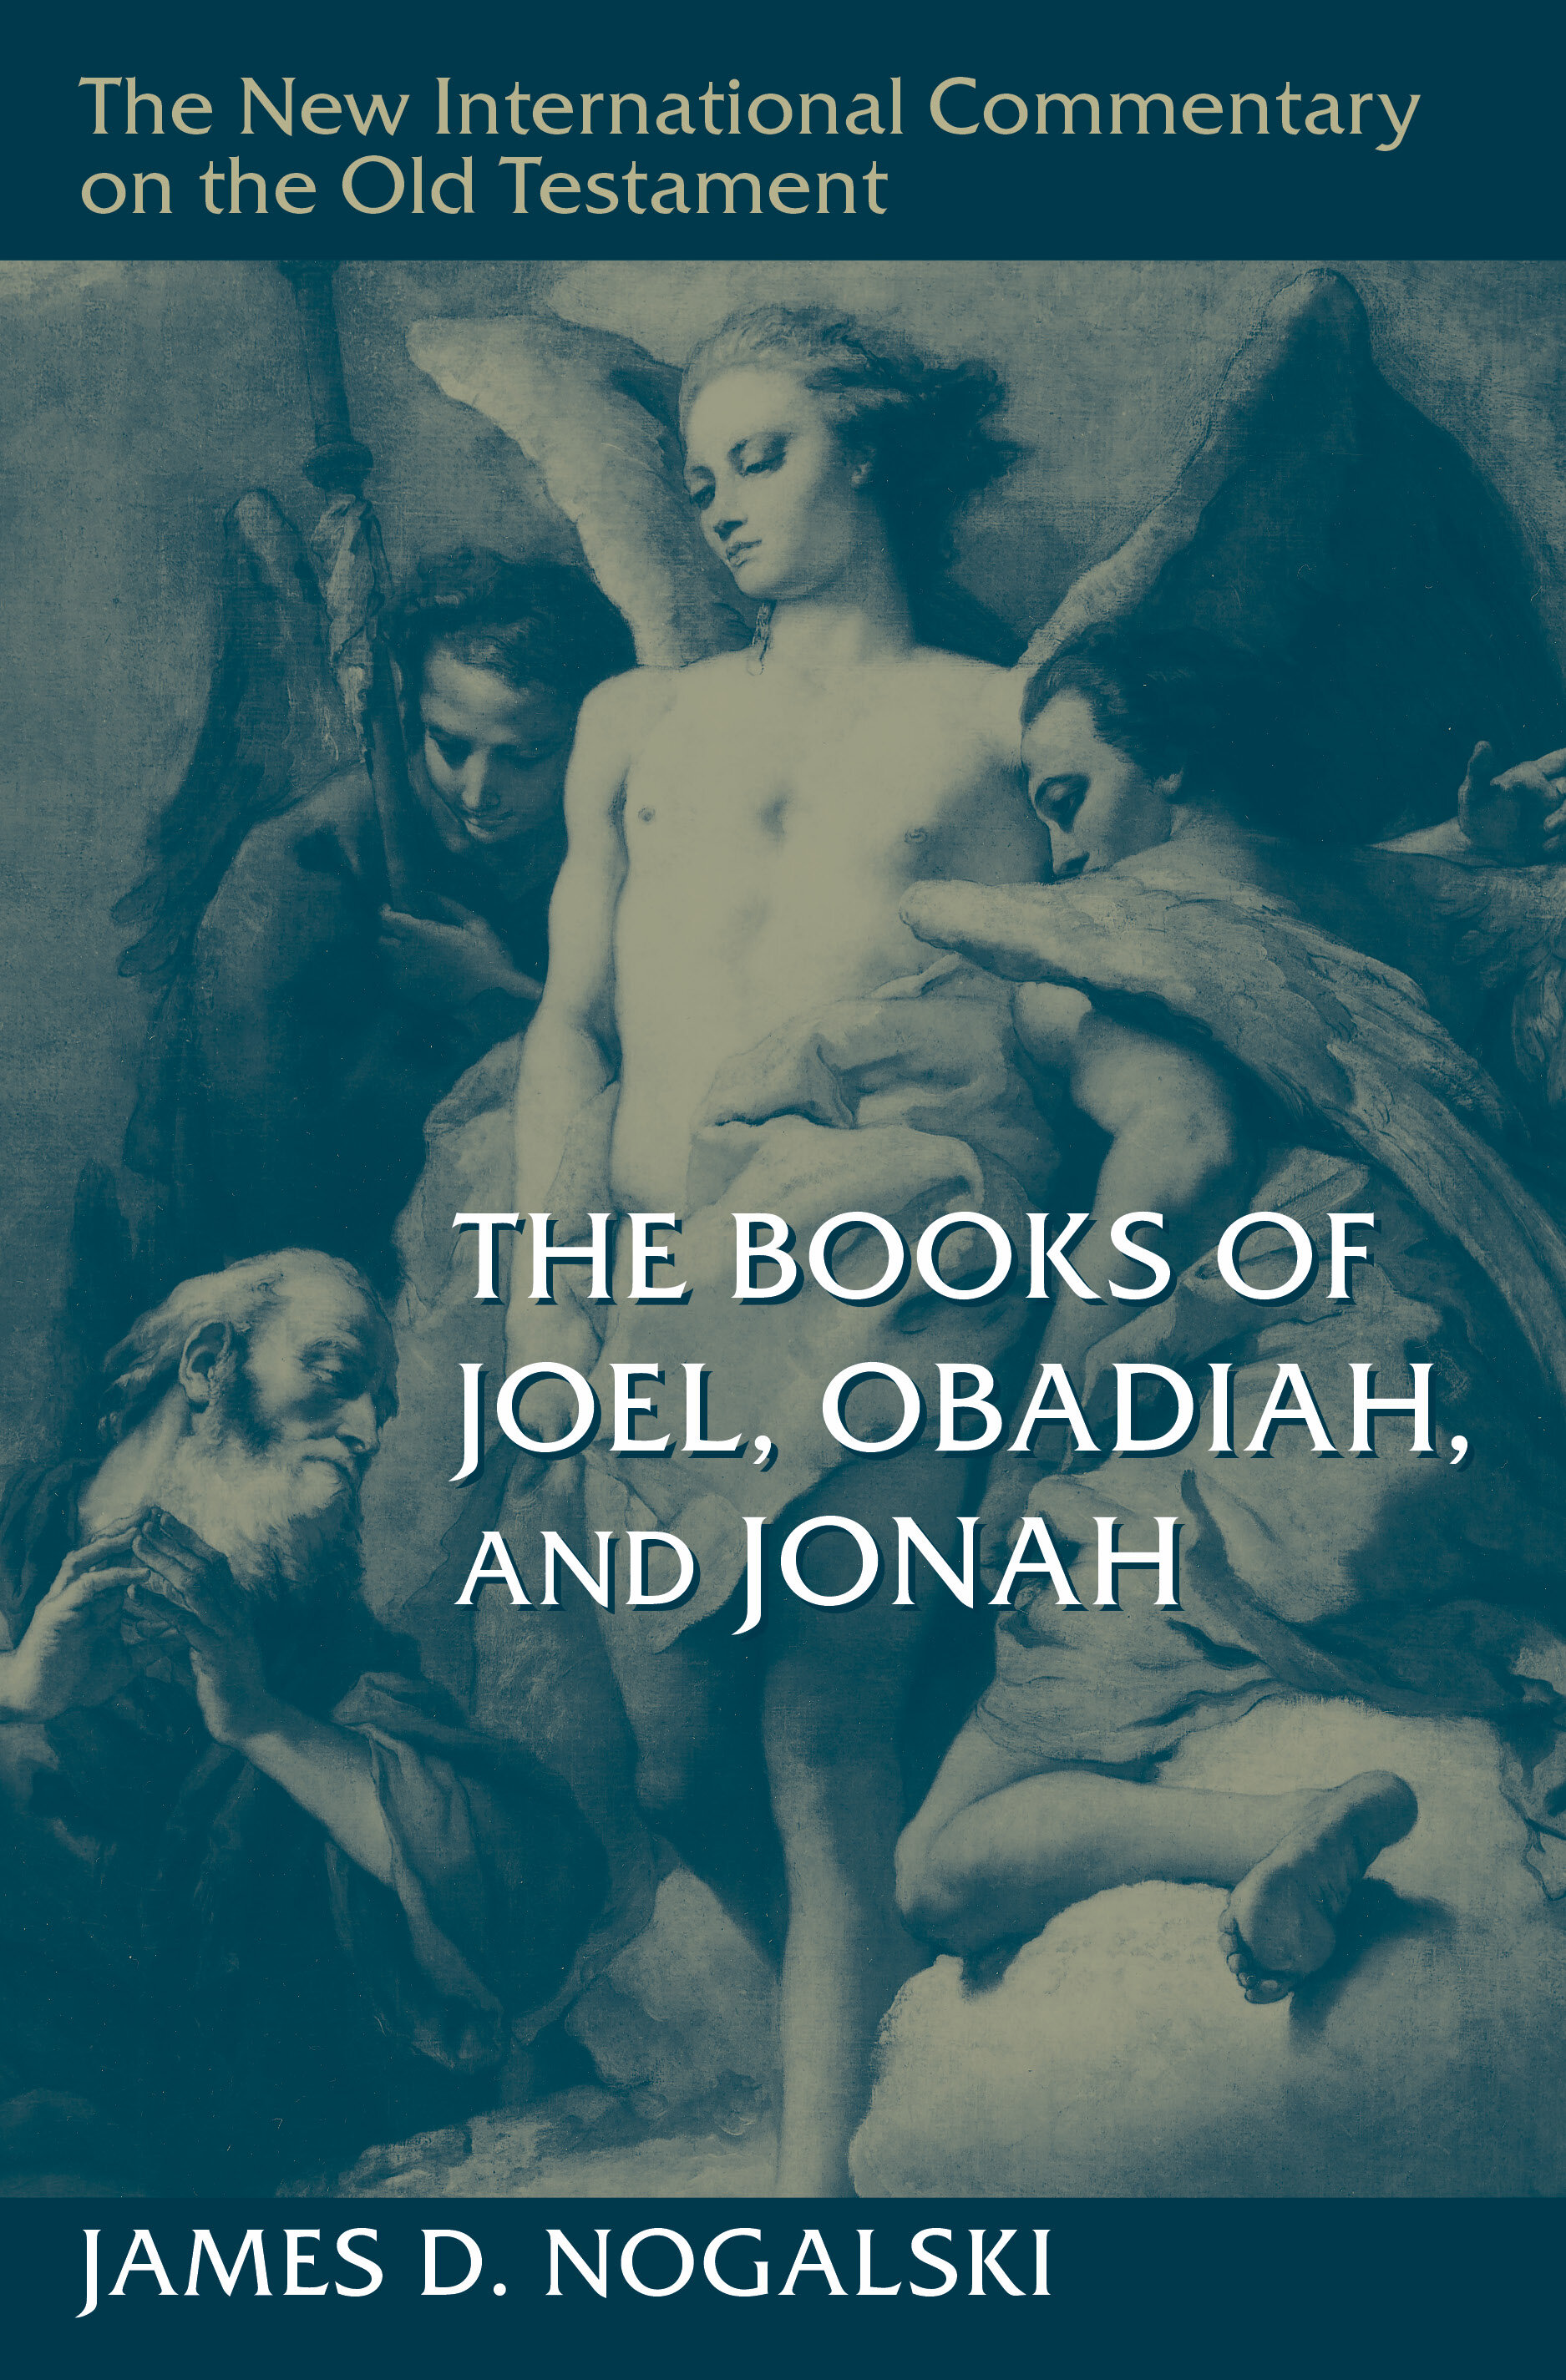 The Books of Joel, Obadiah, and Jonah (The New International Commentary on the Old Testament | NICOT)